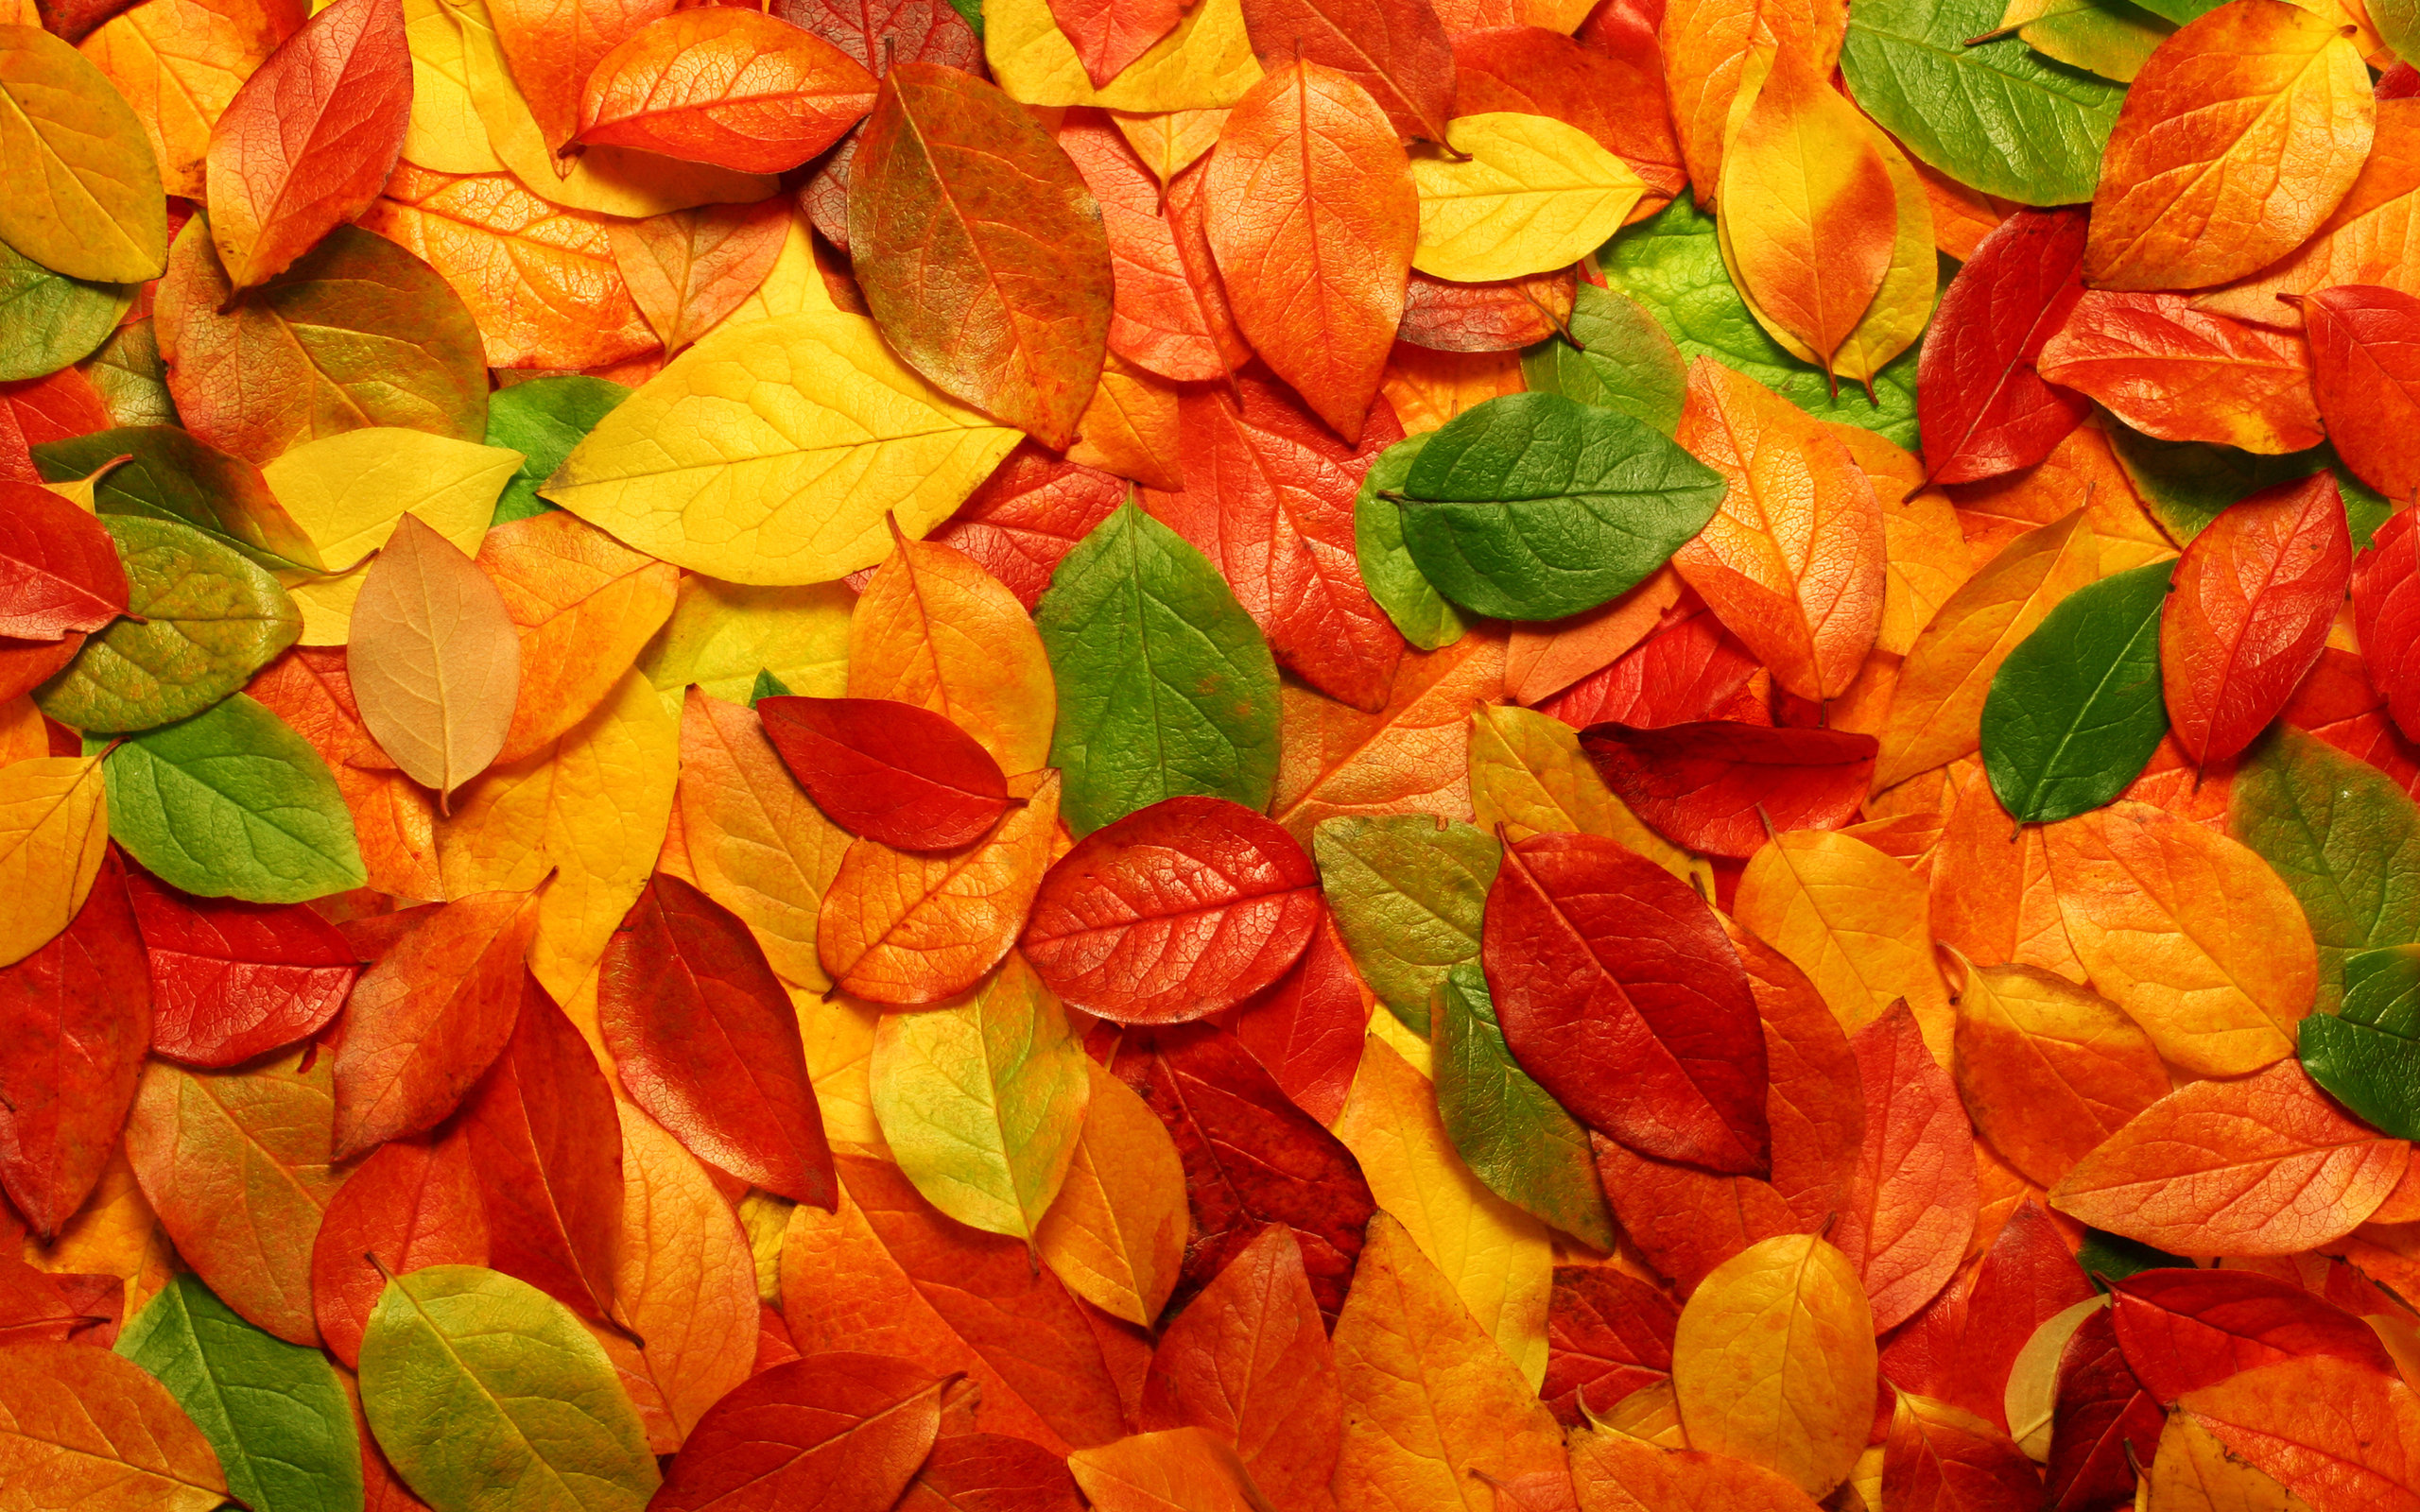 Autumn Leaves Wallpaper Hd Images amp Pictures   Becuo 2560x1600